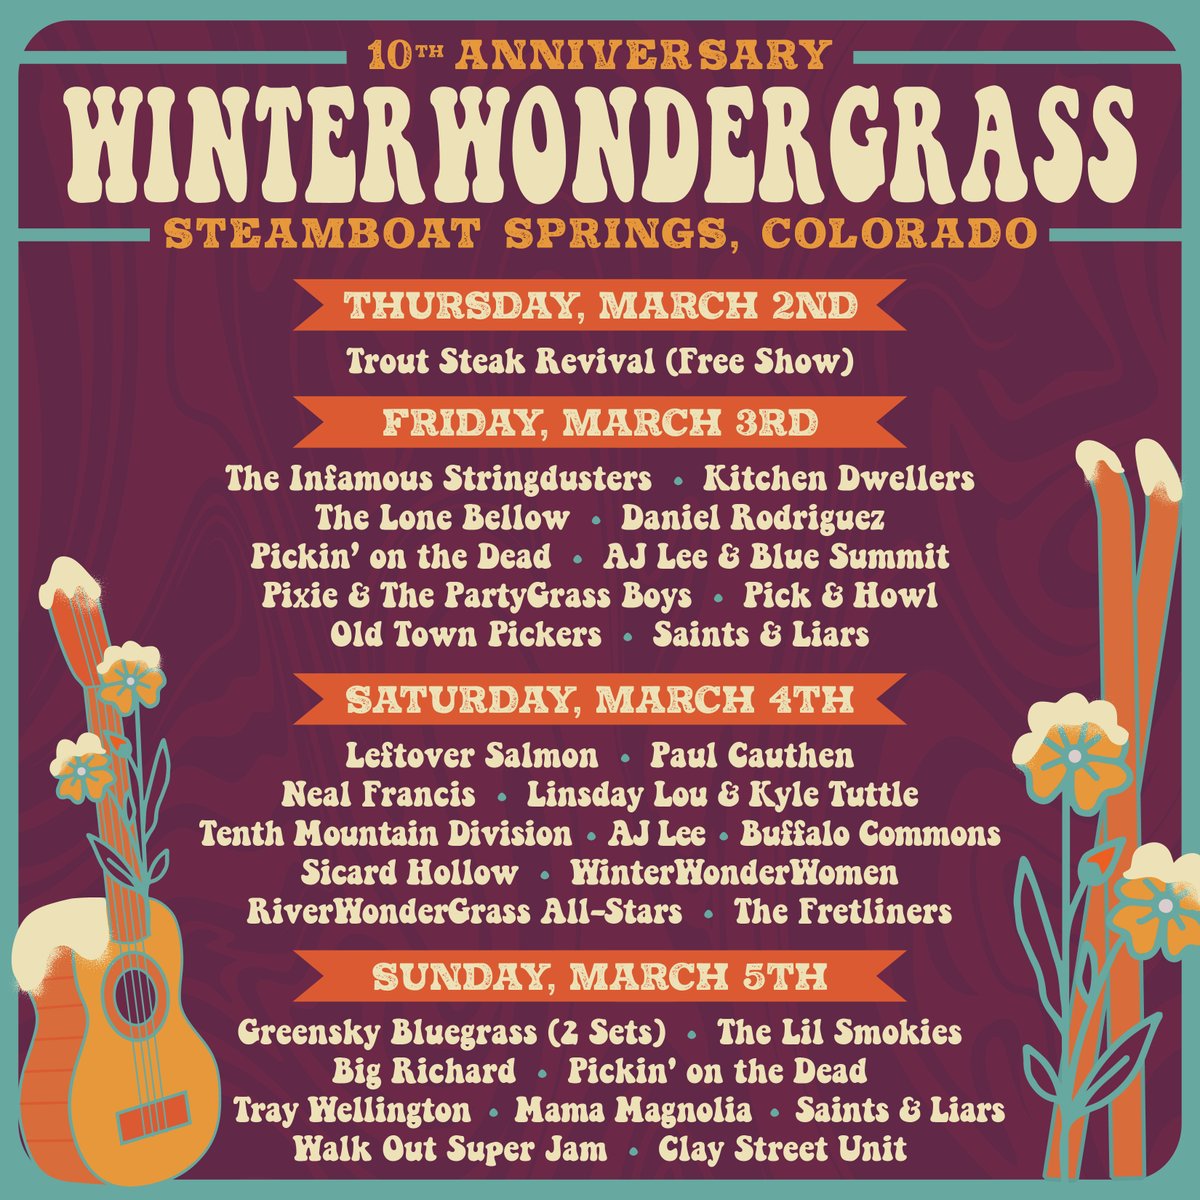 See you at @WWGfestival on March 4 in Steamboat Springs! winterwondergrass.com